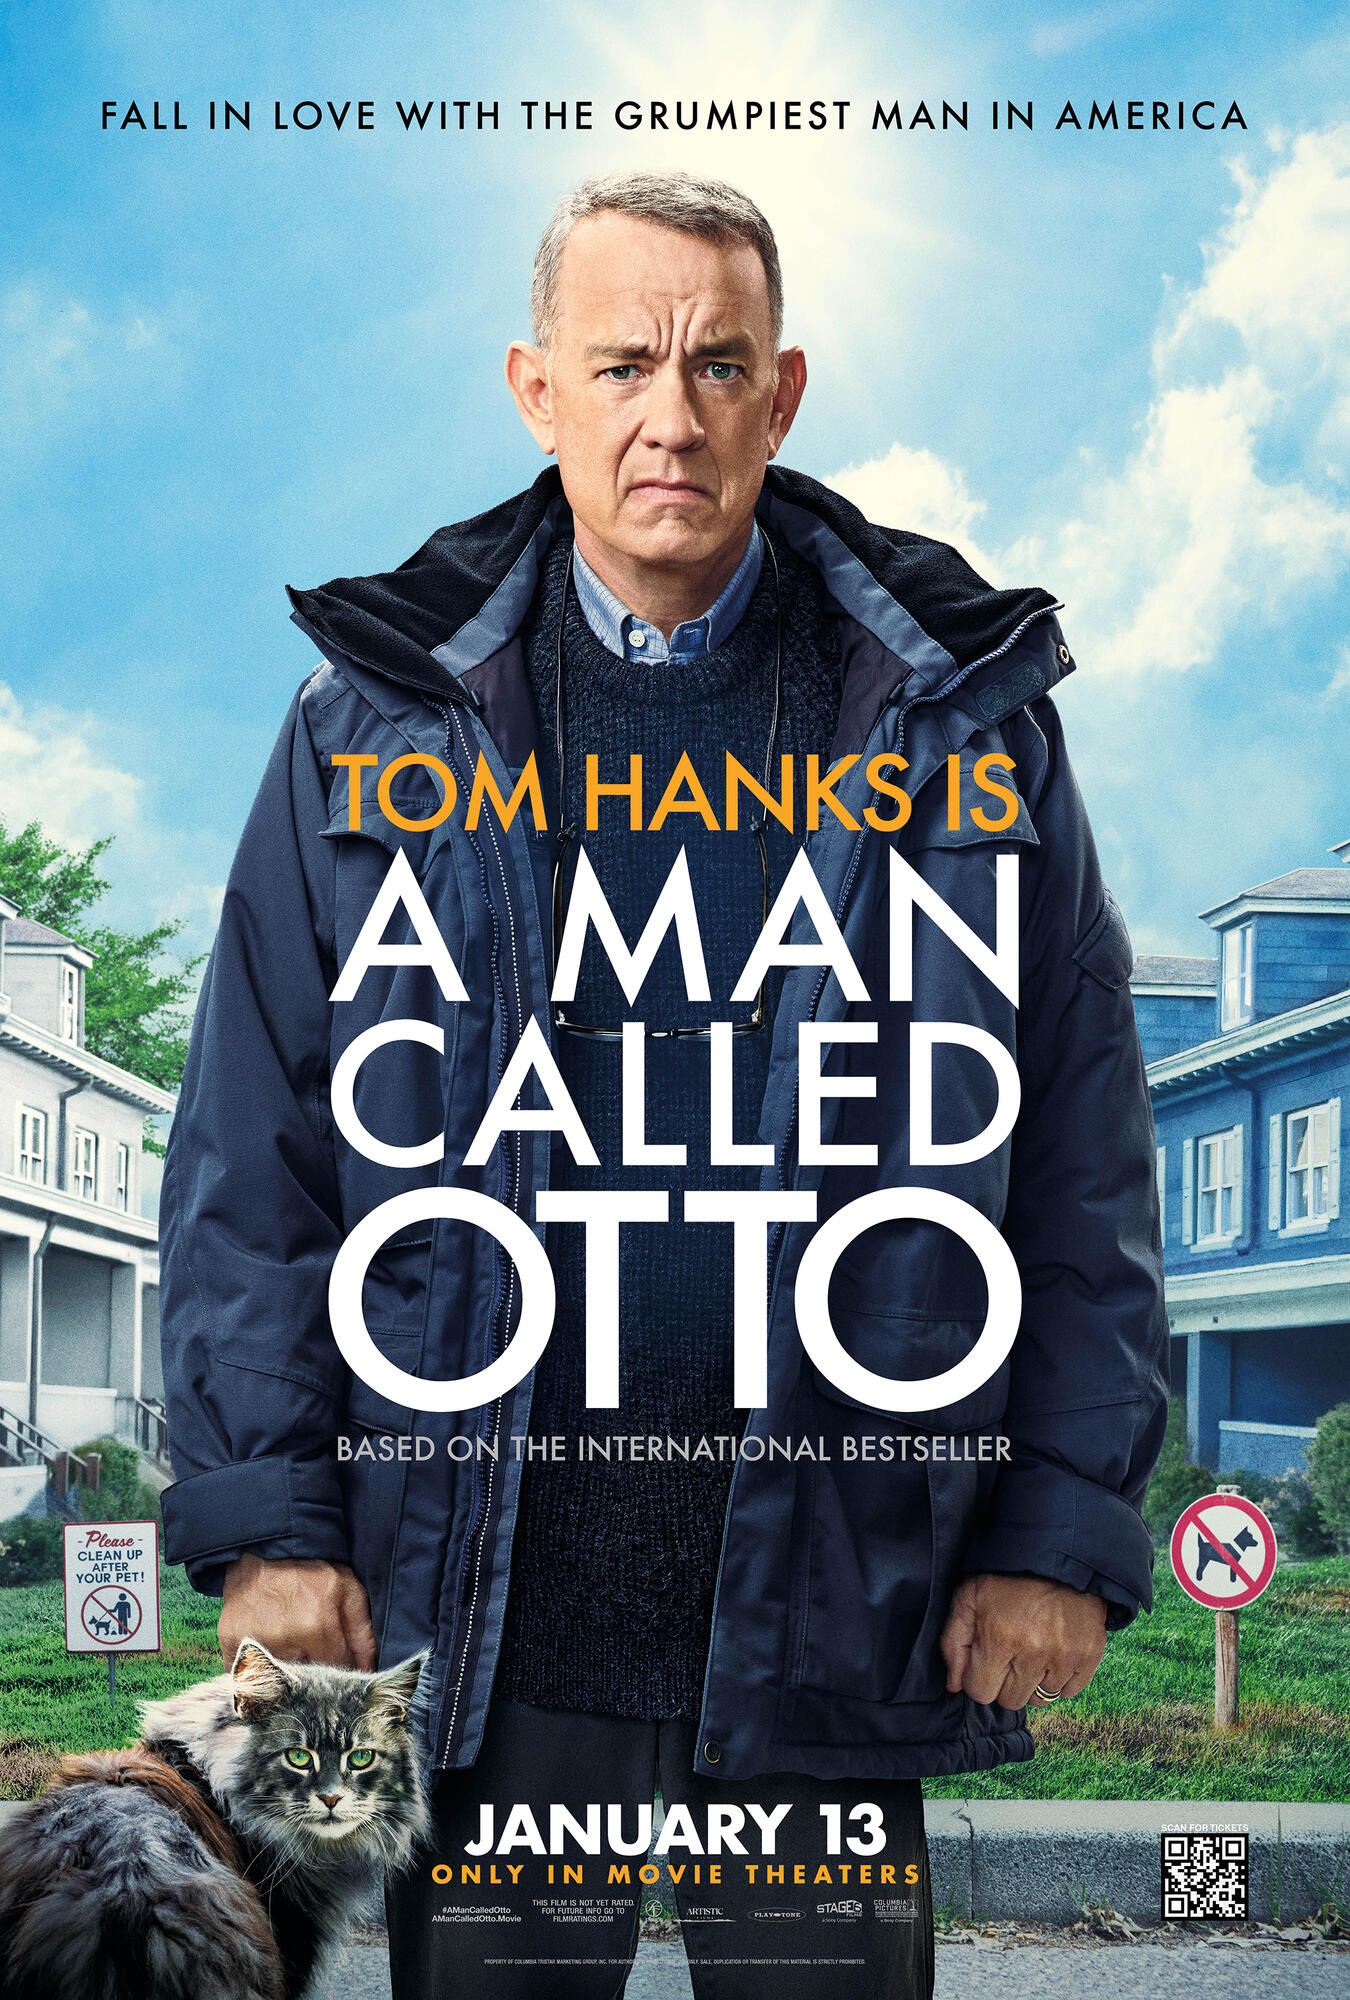 A Man Called Otto Showtimes near Regal Edwards Nampa Spectrum  : Discover Now!